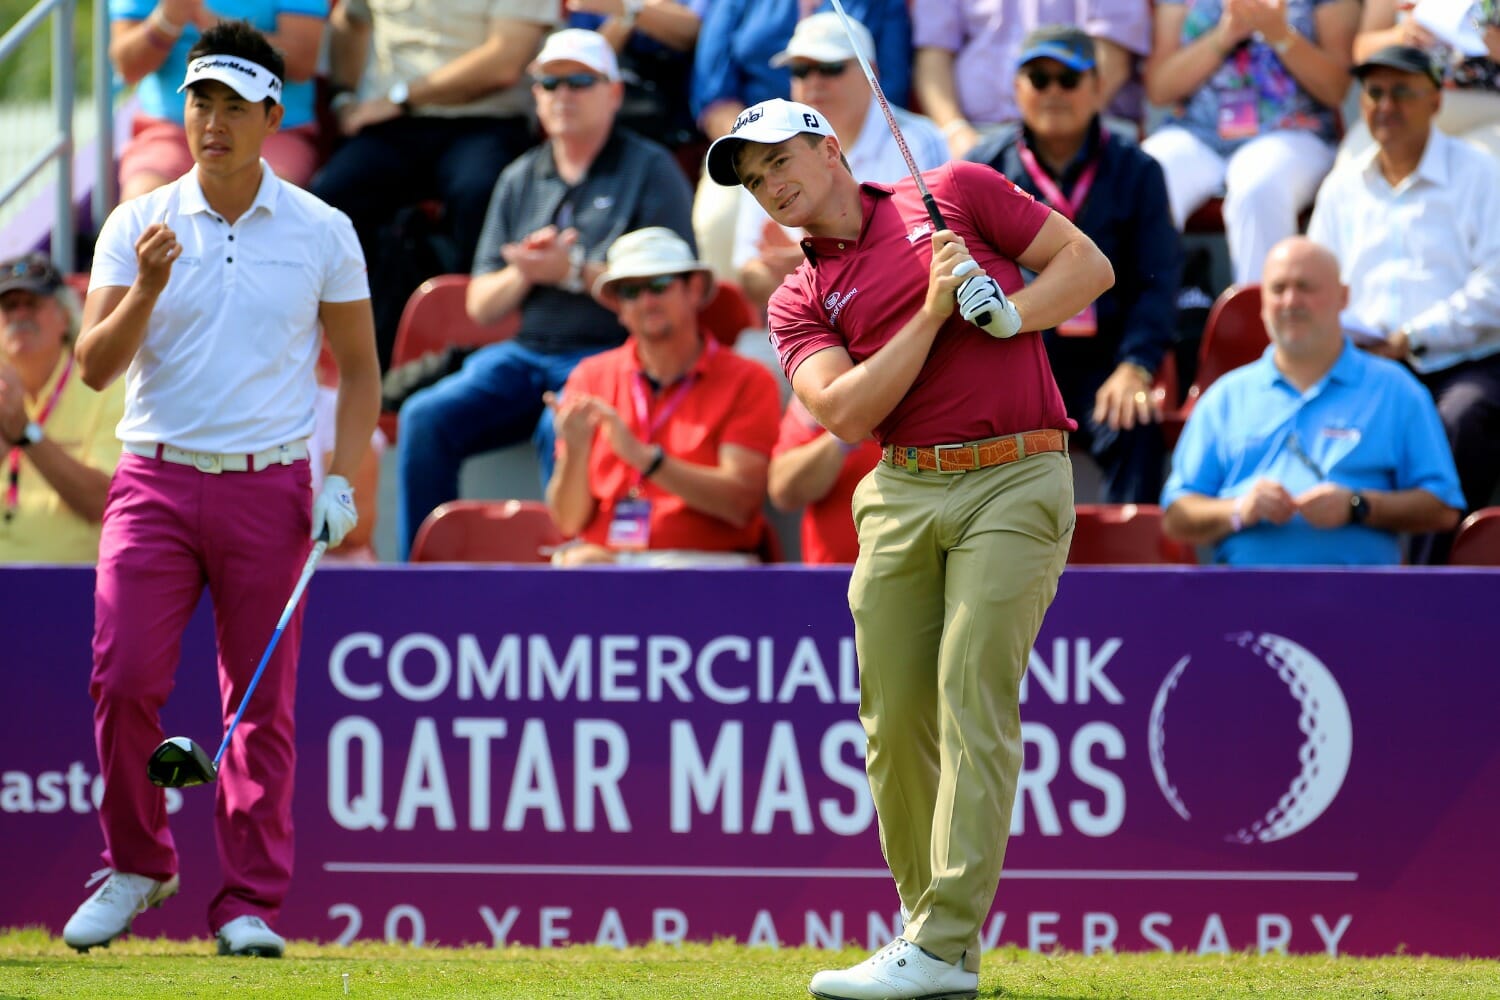 Wang wins in Qatar as Dunne and McDowell finish mid table